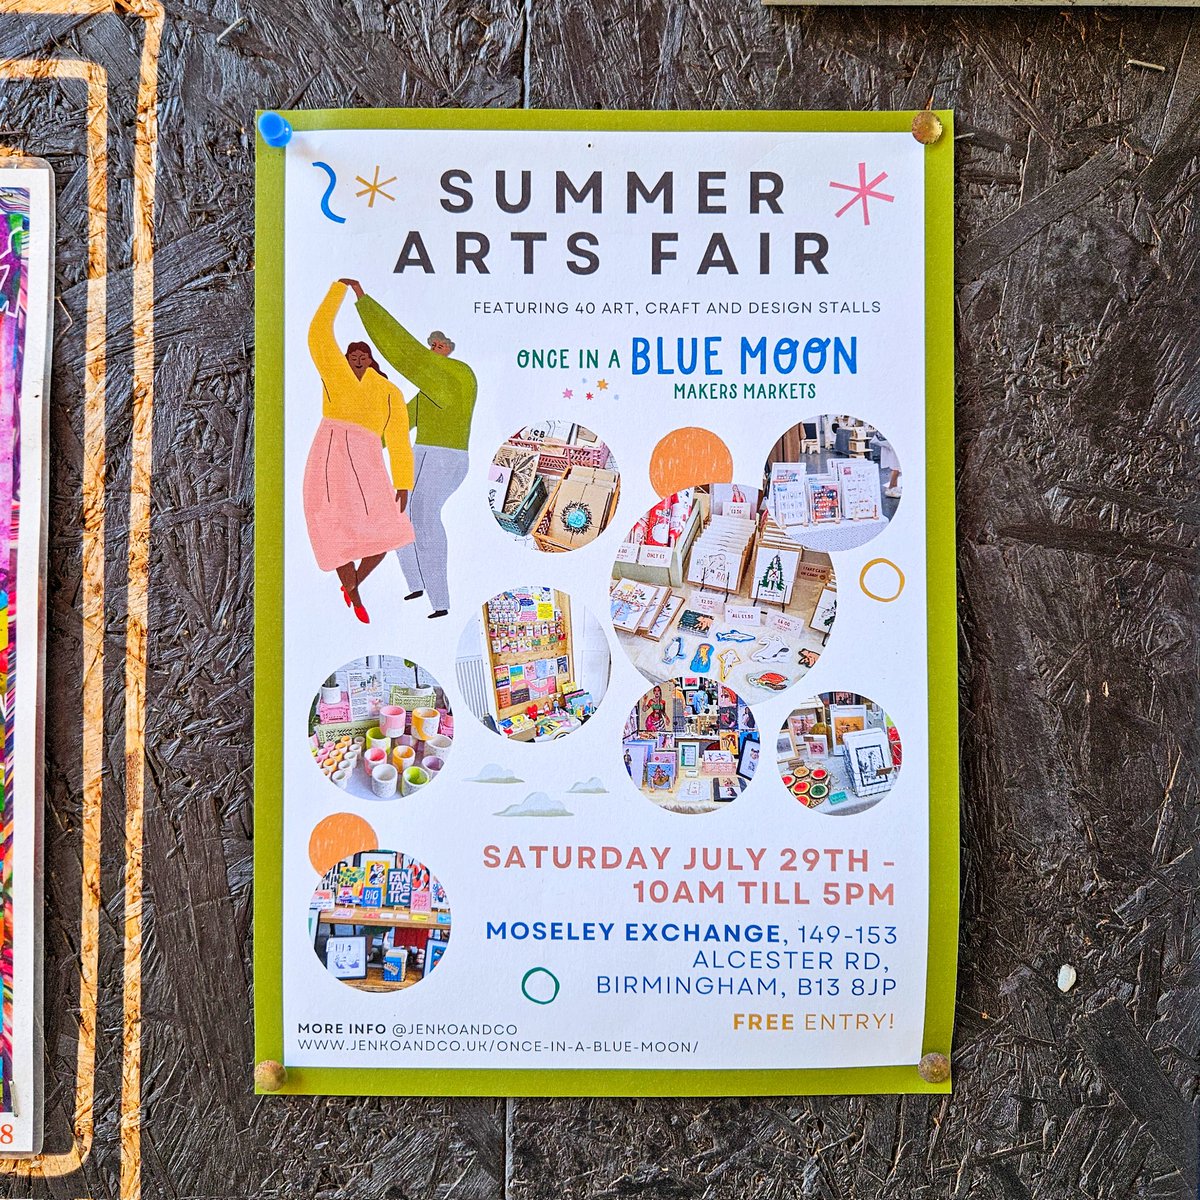 spent my saturday walking around moseley, giving out posters & flyers to local businesses to advertise our lovely summer arts fair!!! two weeks today & a stellar line-up. ☺️🥳✏️✨️ 
#illustration #art #artfair #artsmarket #makersmarket #birmingham #moseley #summer #design #yay